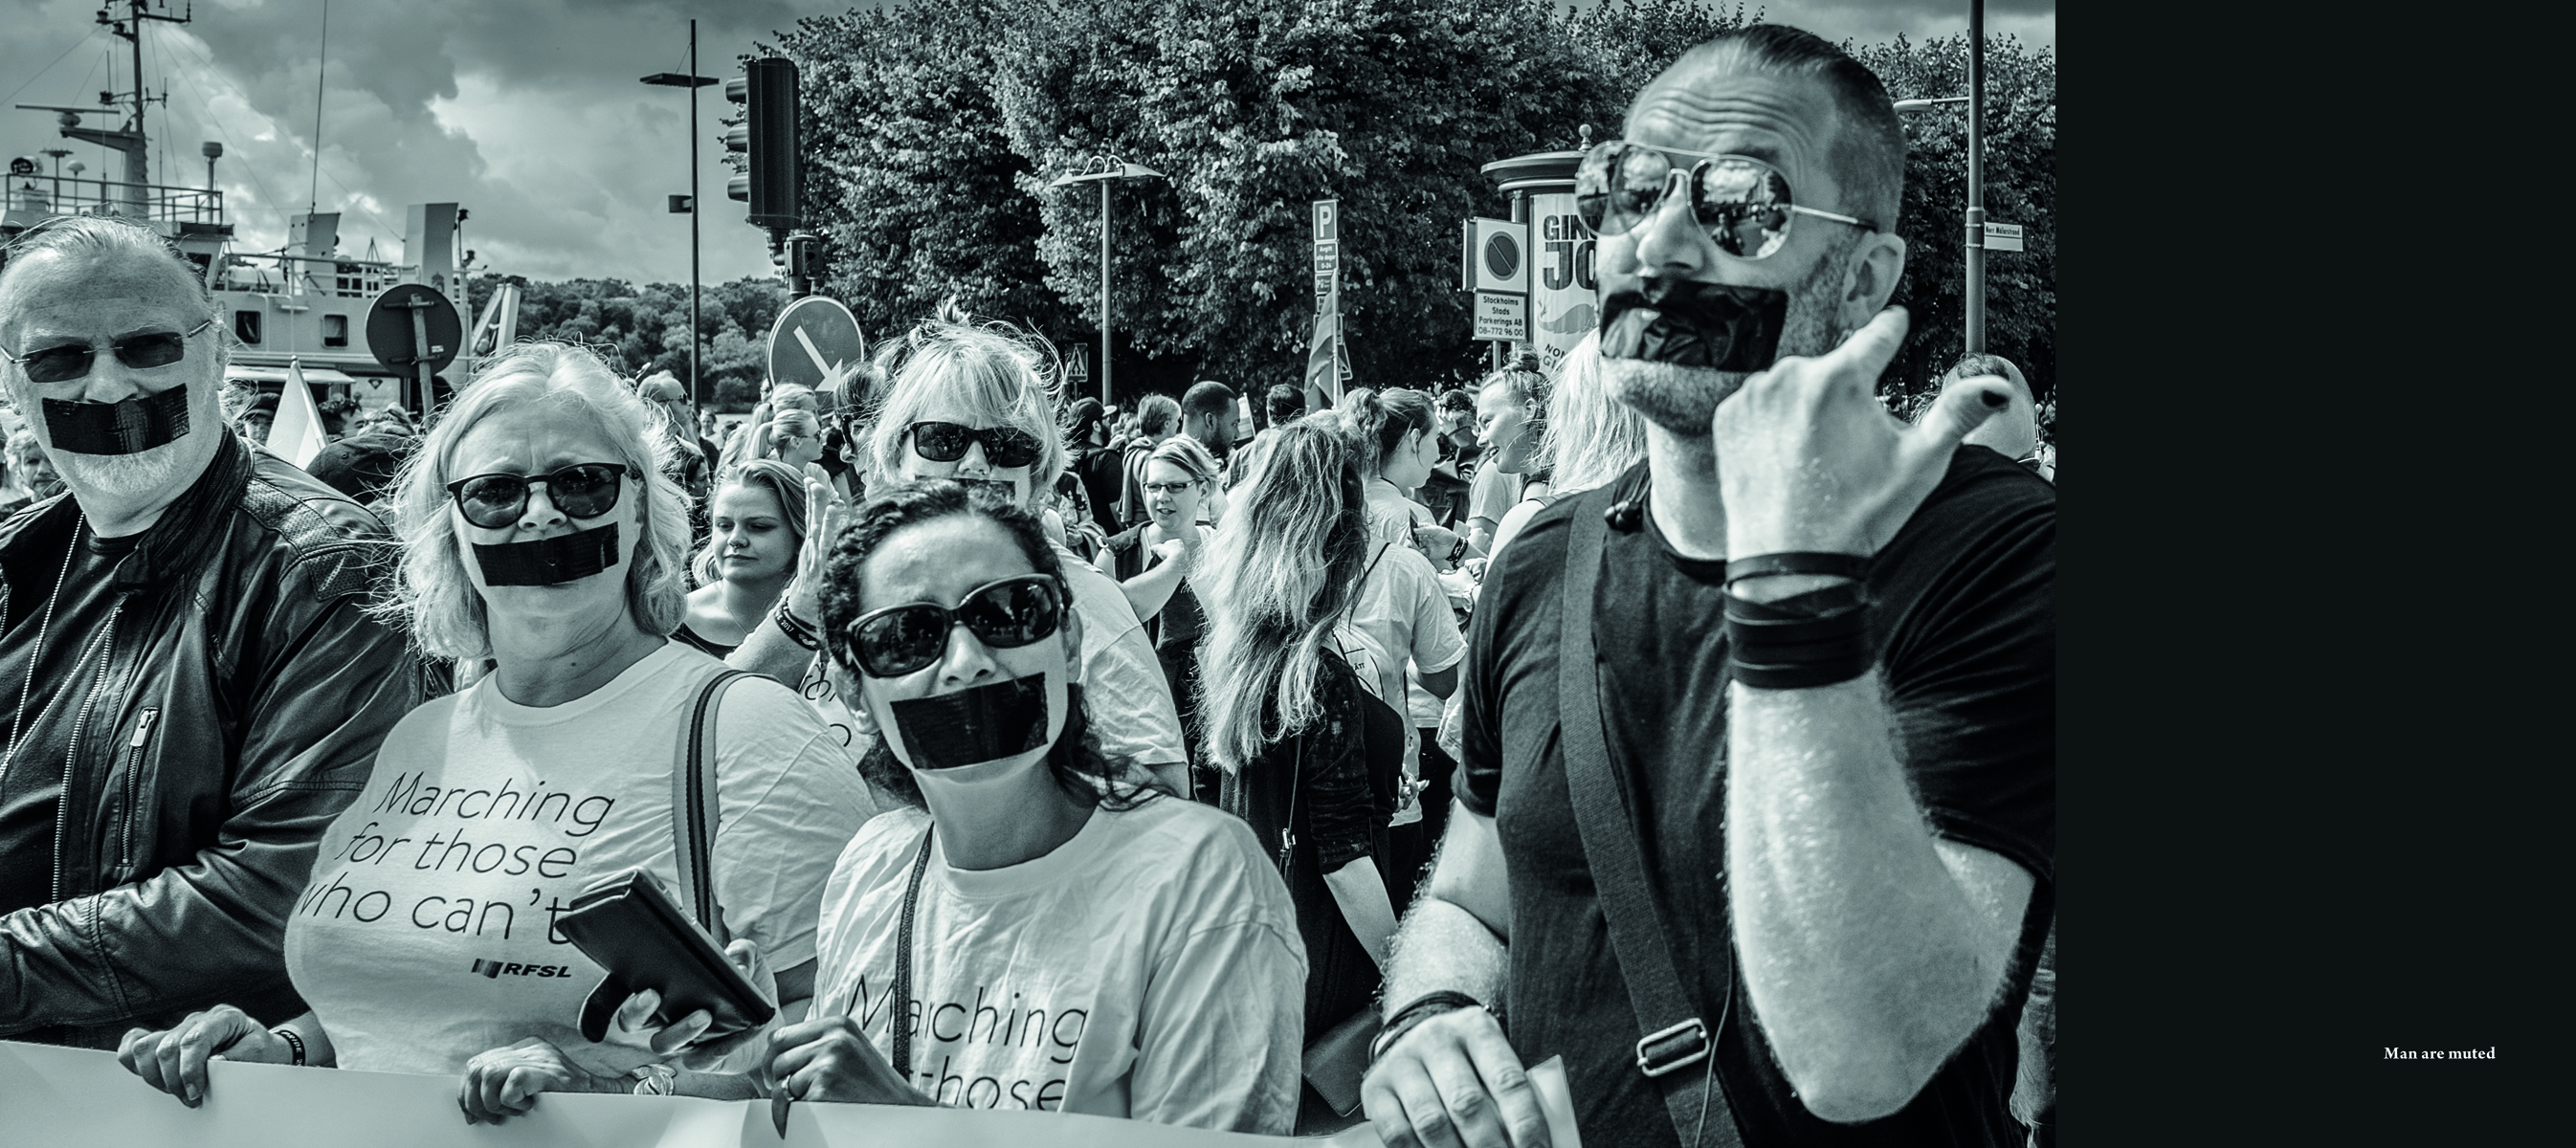 Shot of group of people with black tape covering their mouths, thoughts about mankind Christer Lofgren in black font on left grey banner.